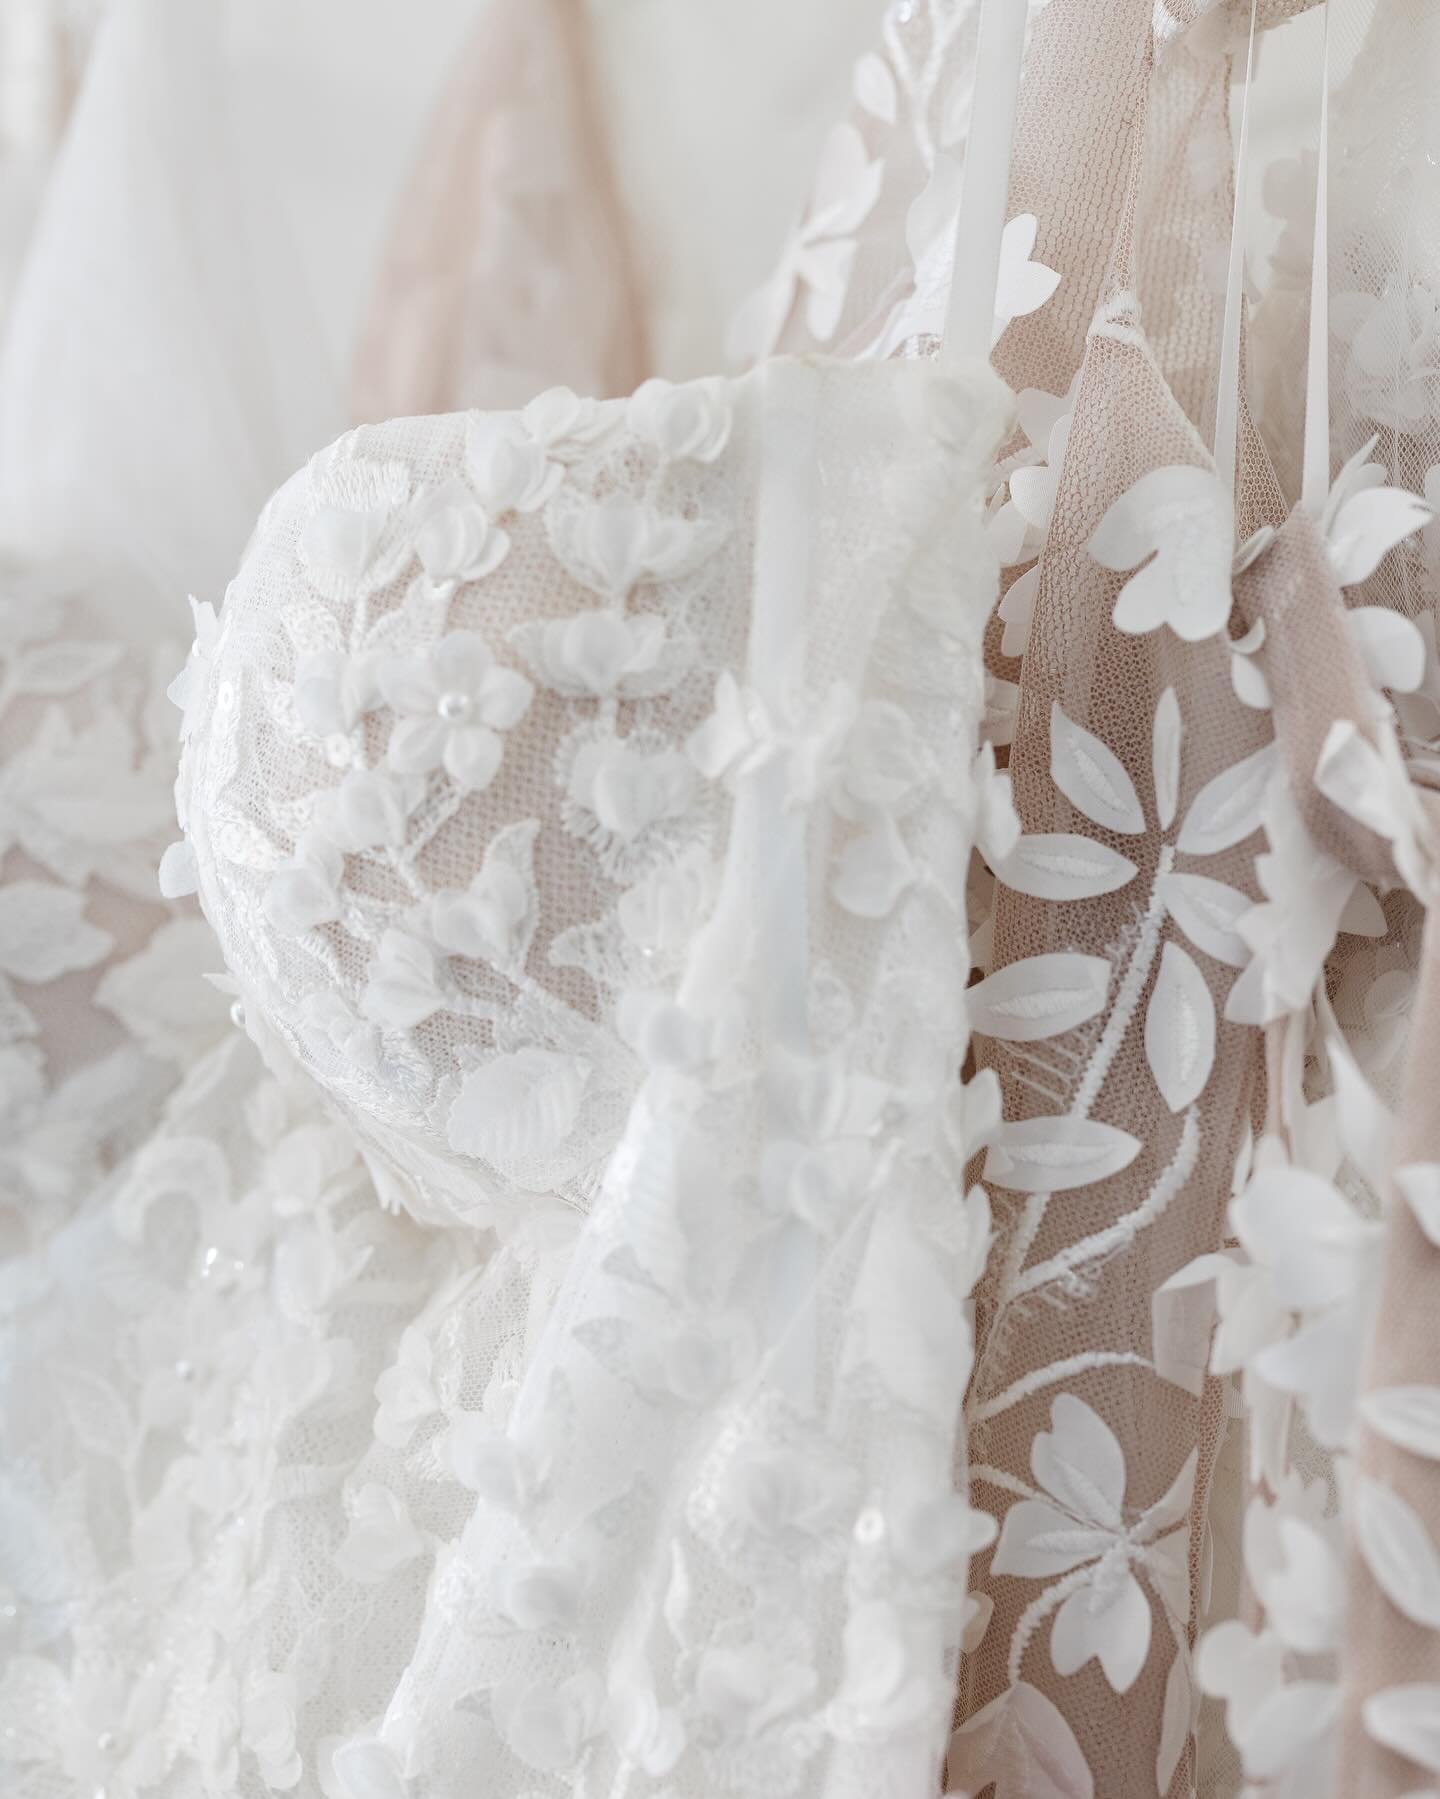 Dresses a&rsquo;plenty &mdash; we&rsquo;ve got what you need.

From intimate gatherings to grand celebrations, our boutique has everything you need to make your wedding day truly spectacular. ✨

#blissbride #blissbridal #winnipegweddings #weddingdres